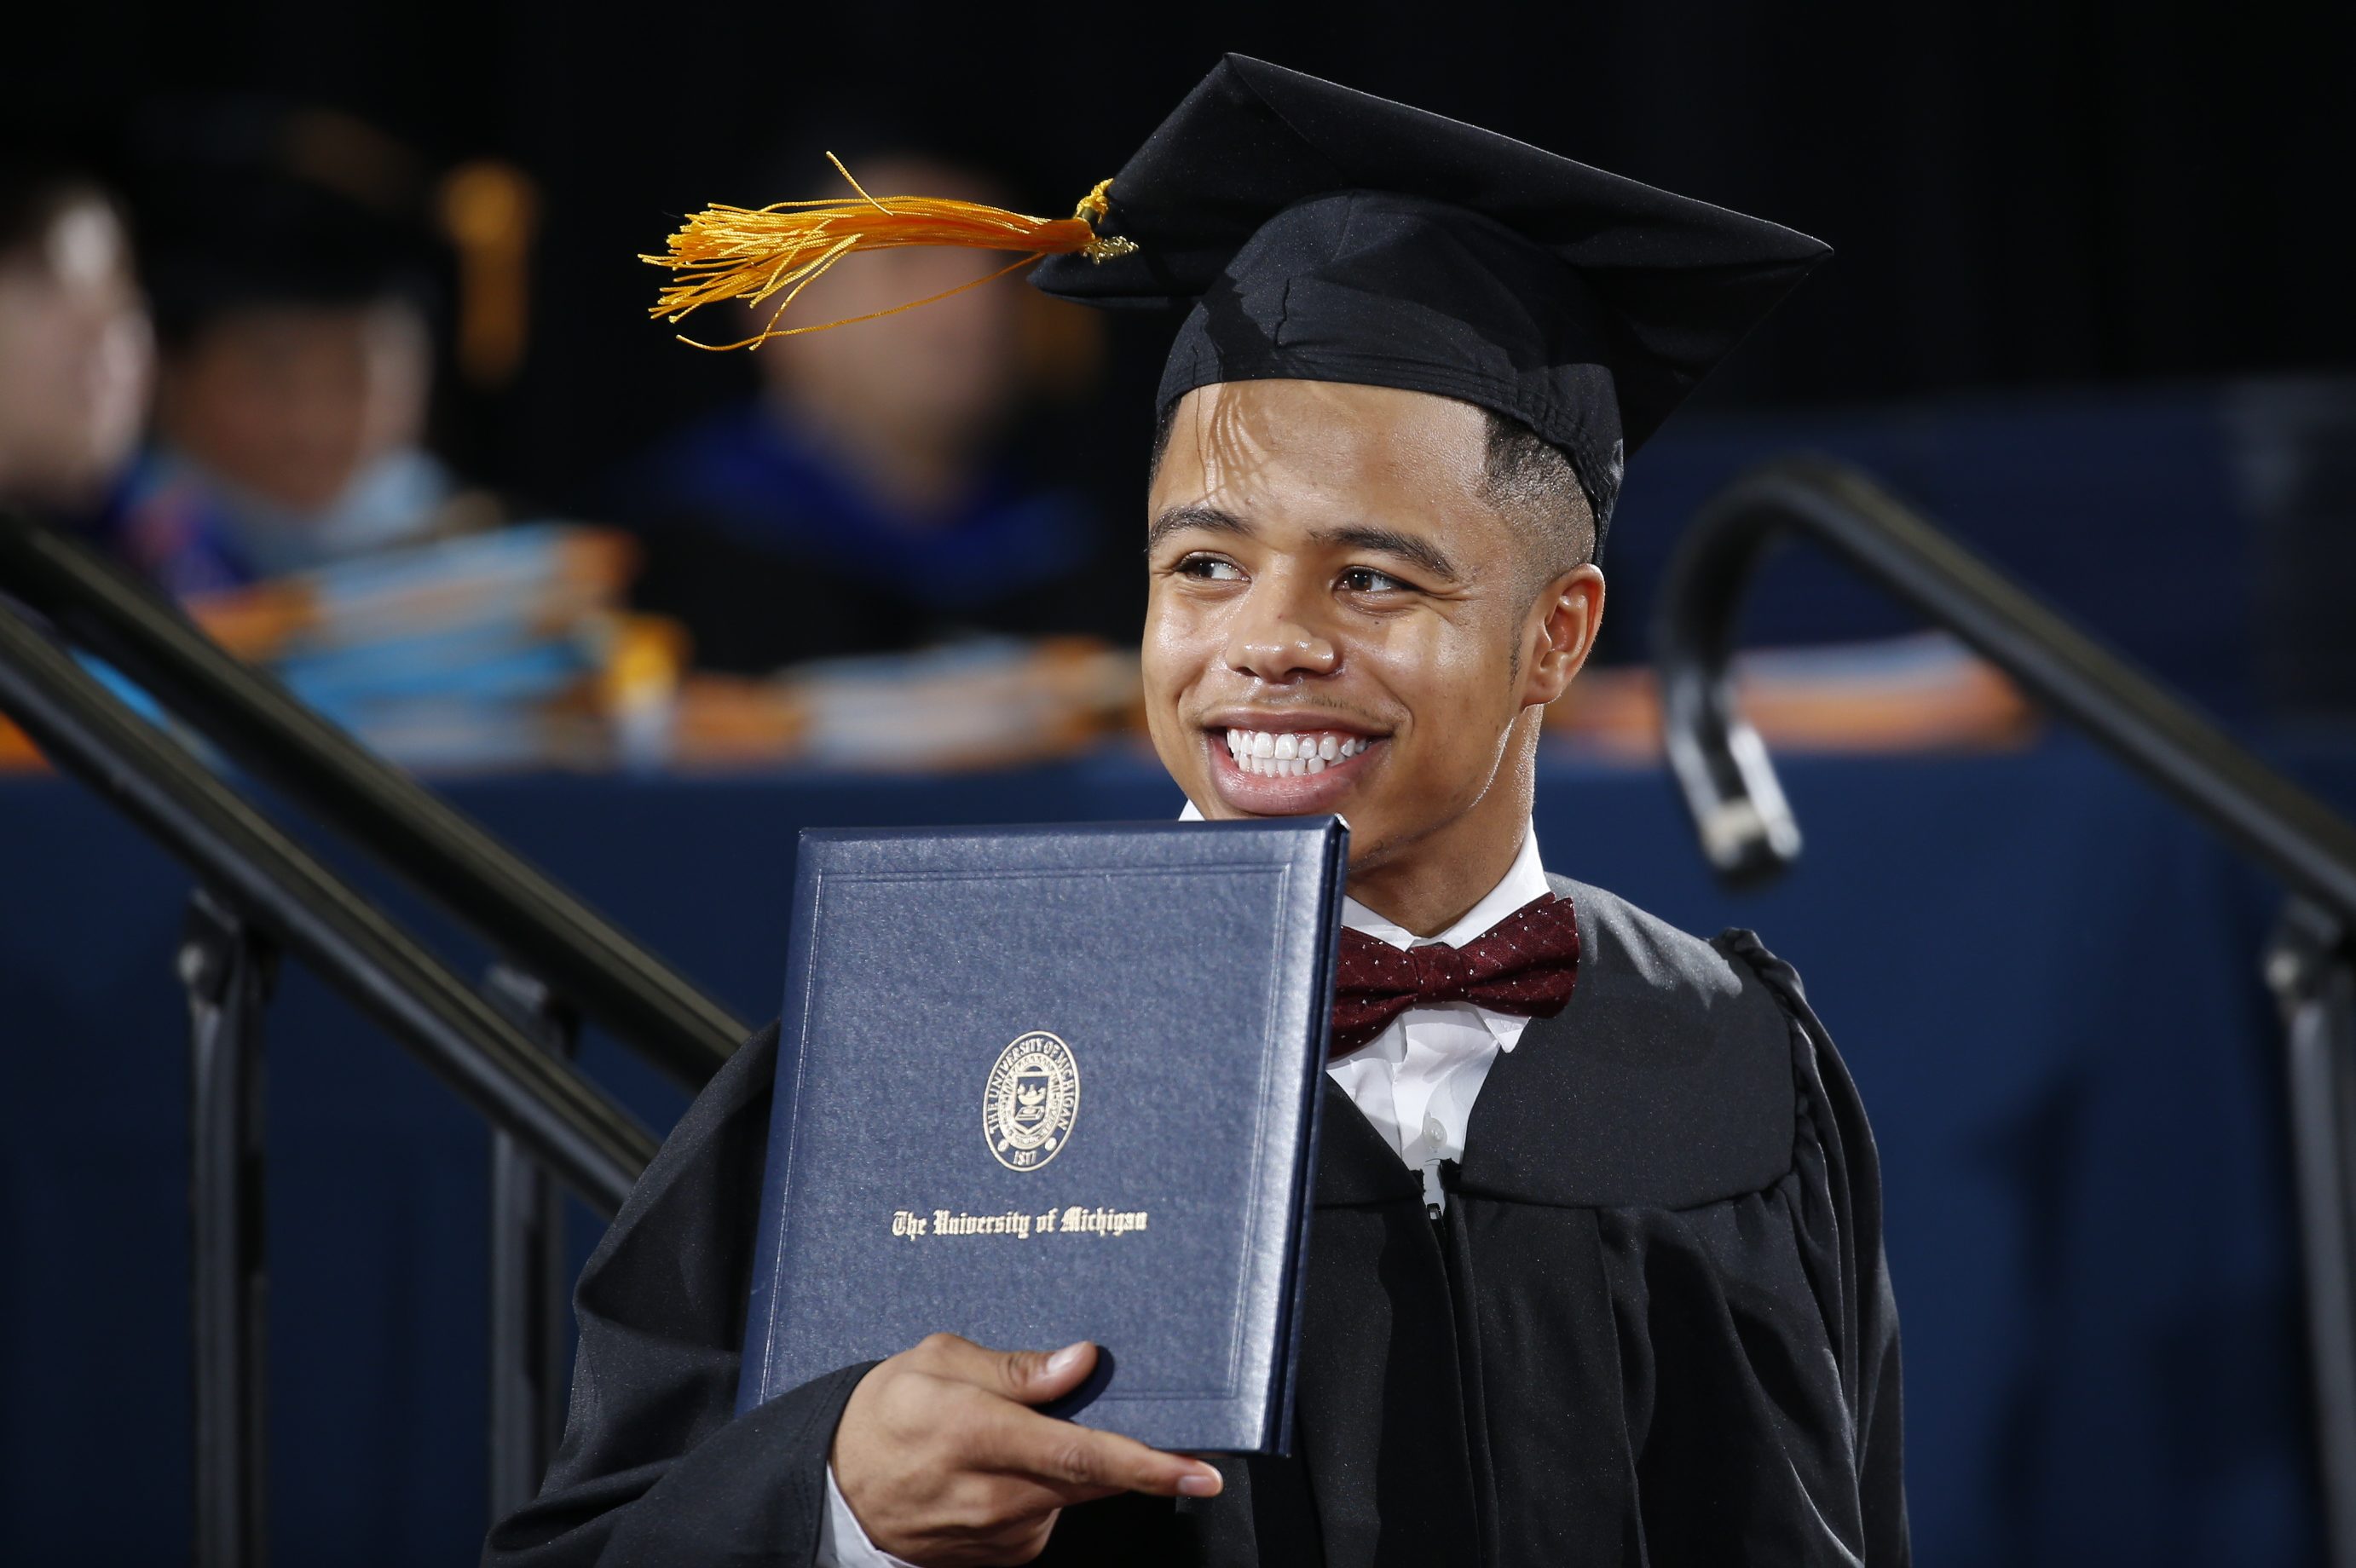 Flint native Rayshawn Riley received his bachelor of business administration degree Sunday.